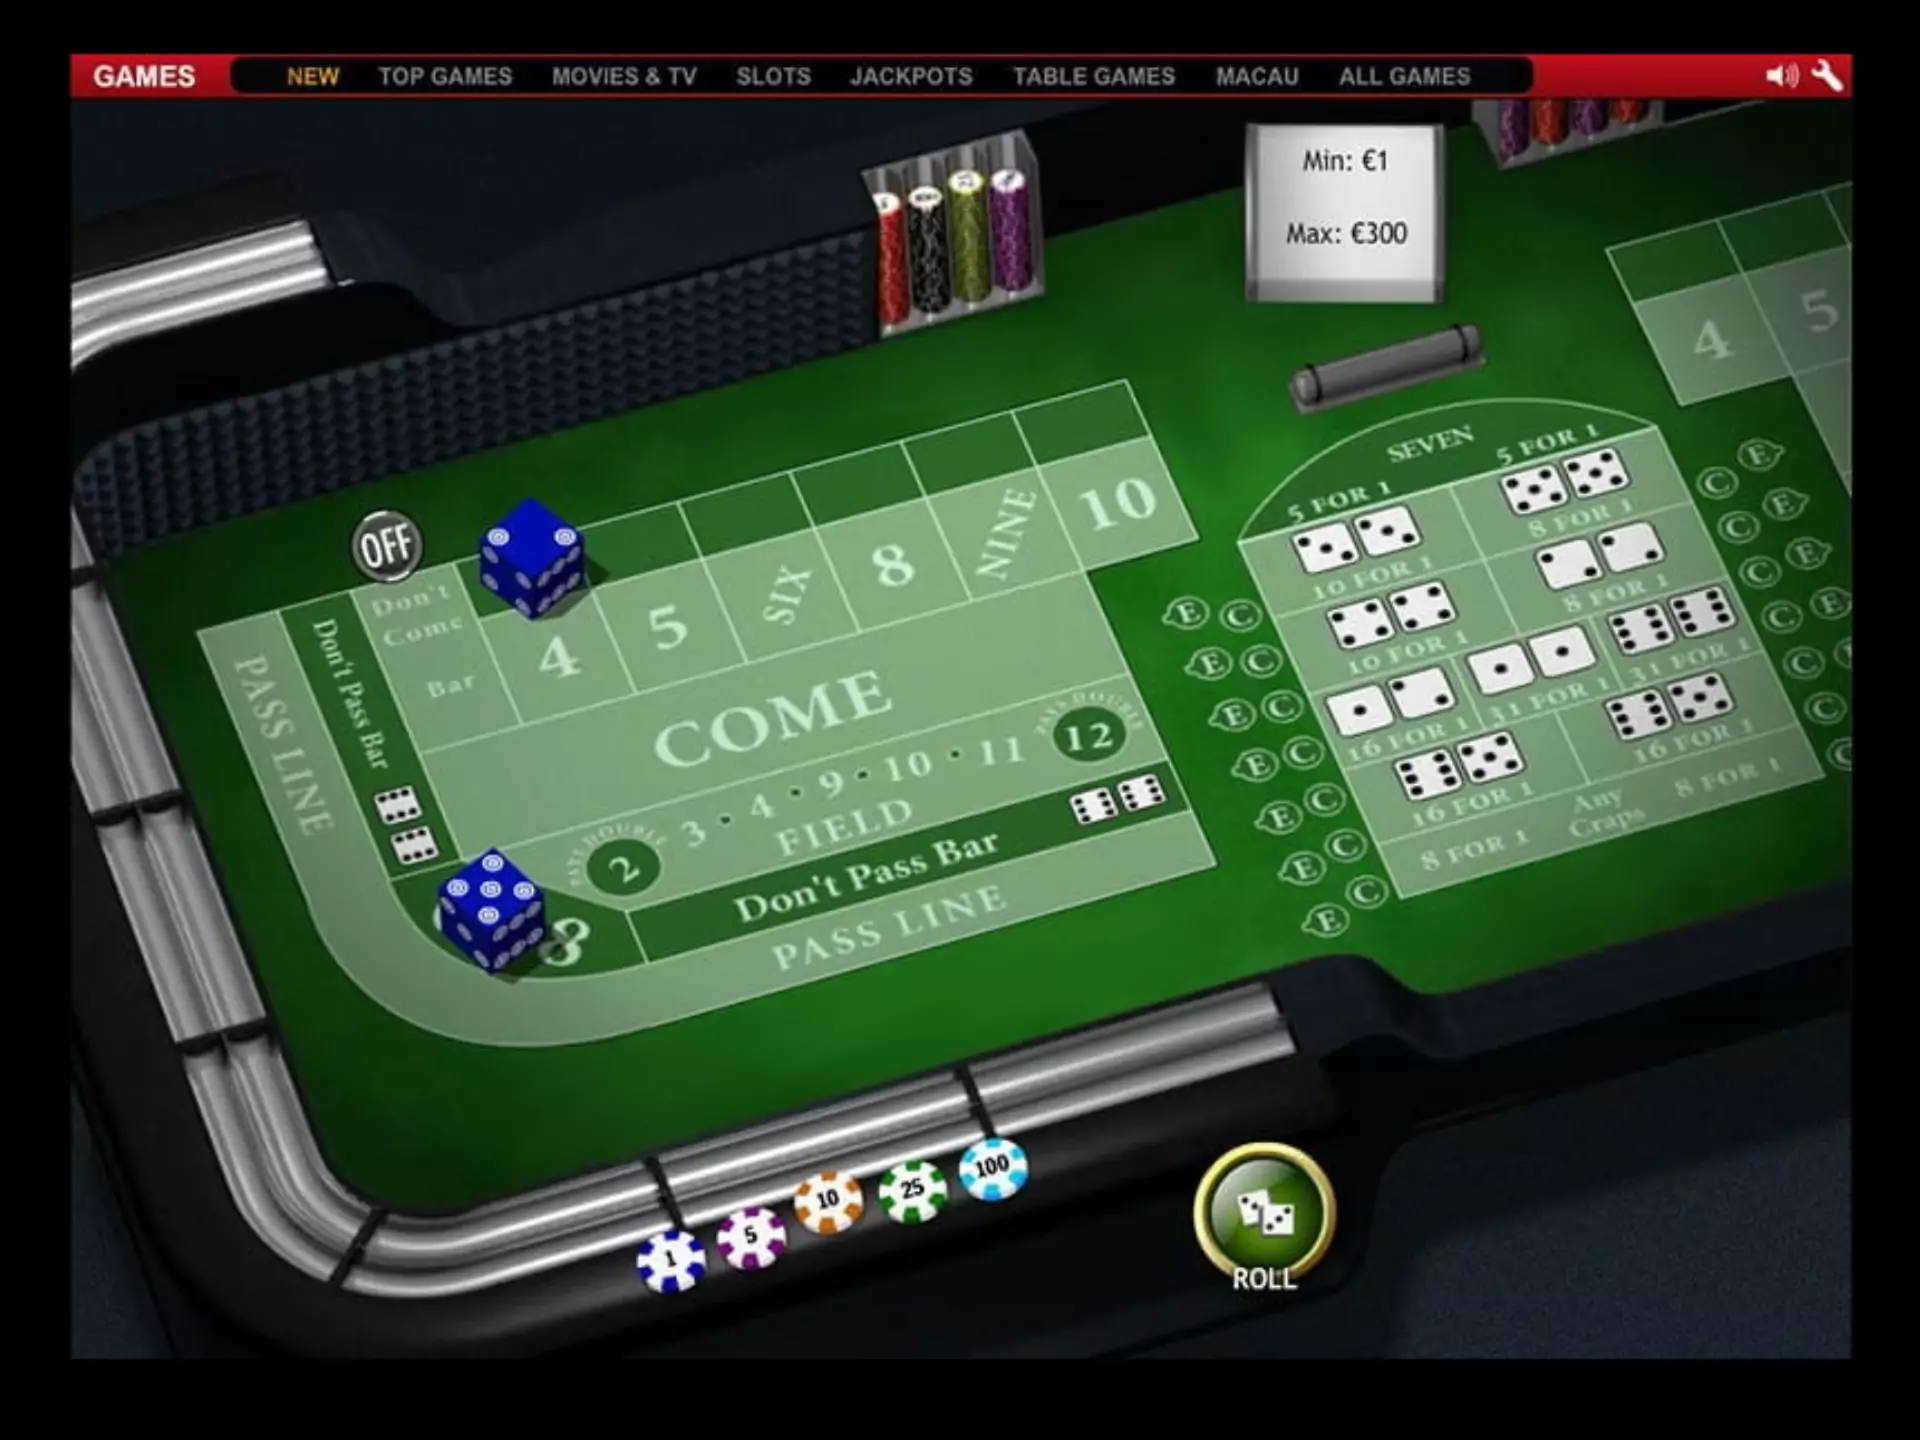 Log in to any online casino, find the Craps game and start playing on money.